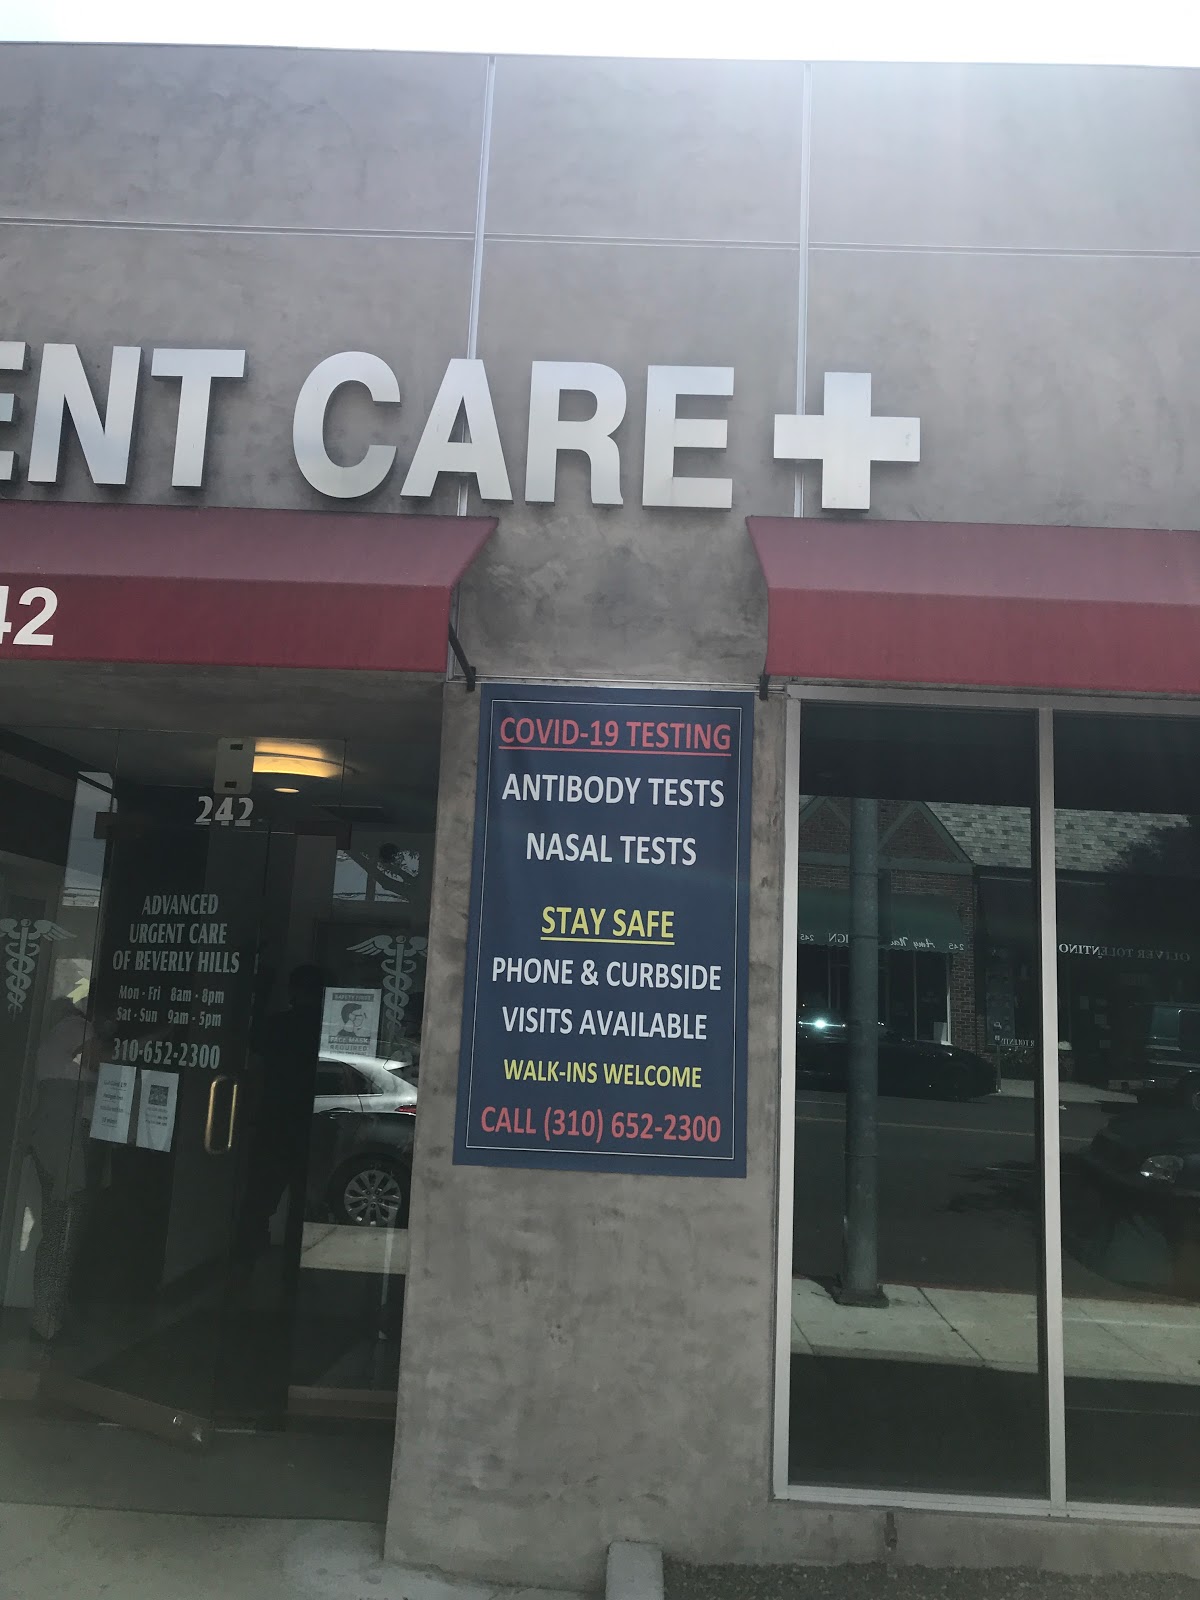 Photo of UrgentMED Advanced Urgent Care of Beverly Hills COVID Testing at 242 S Robertson Blvd, Beverly Hills, CA 90211, USA